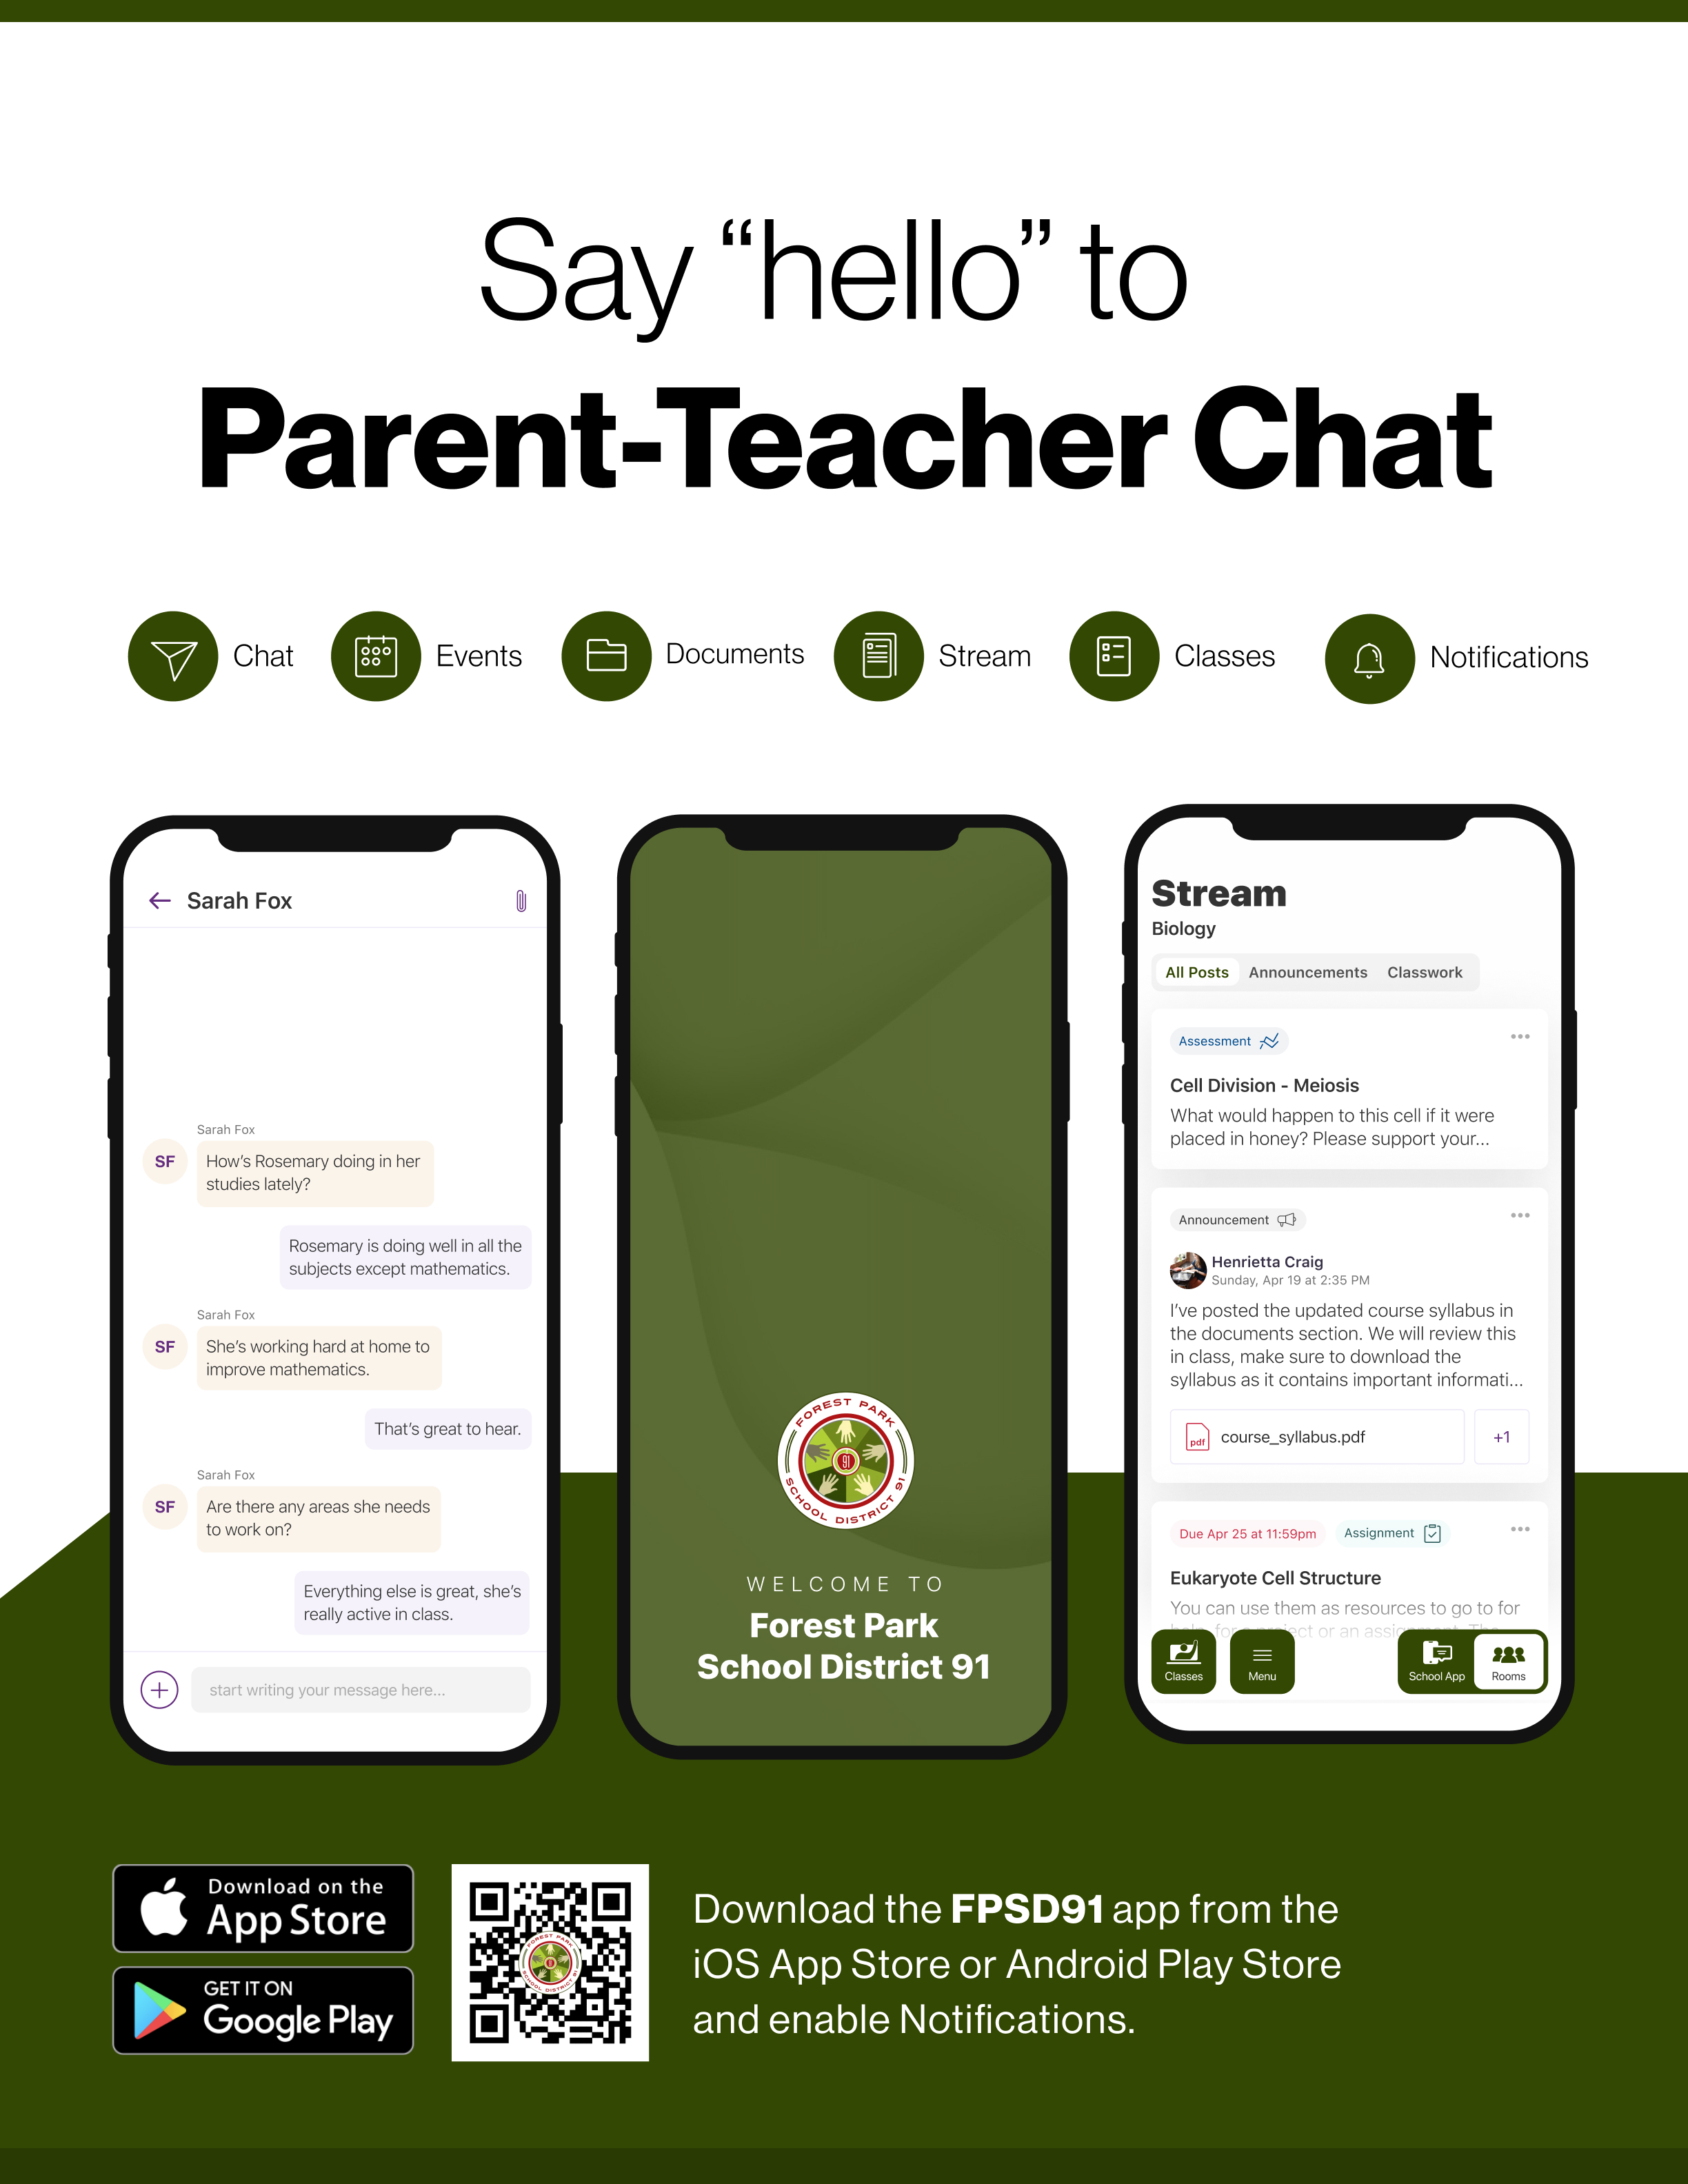 Say hello to Parent-Teacher chat in the new Rooms app. Download the Forest Park School District 91 app in the Google Play or Apple App store.